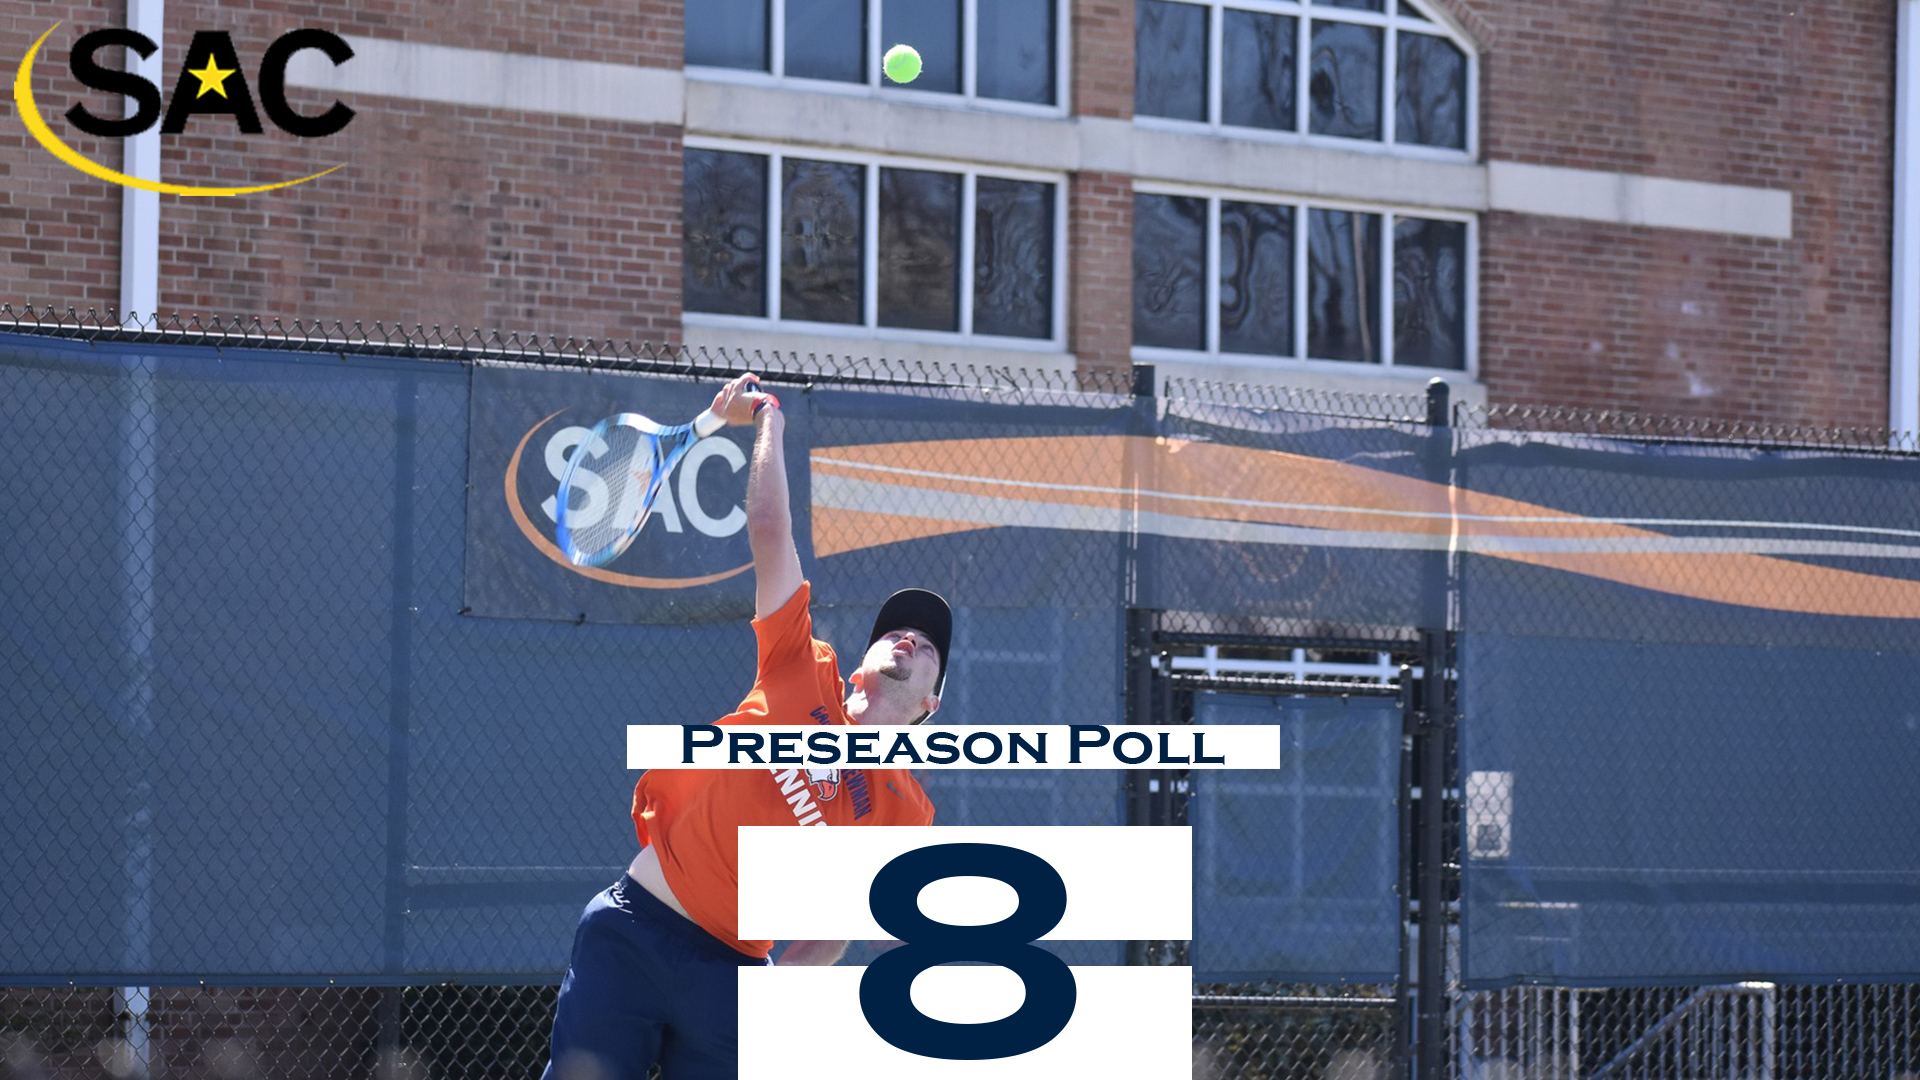 Eagles find themselves mid-pack to begin spring slate of action in SAC preseason poll